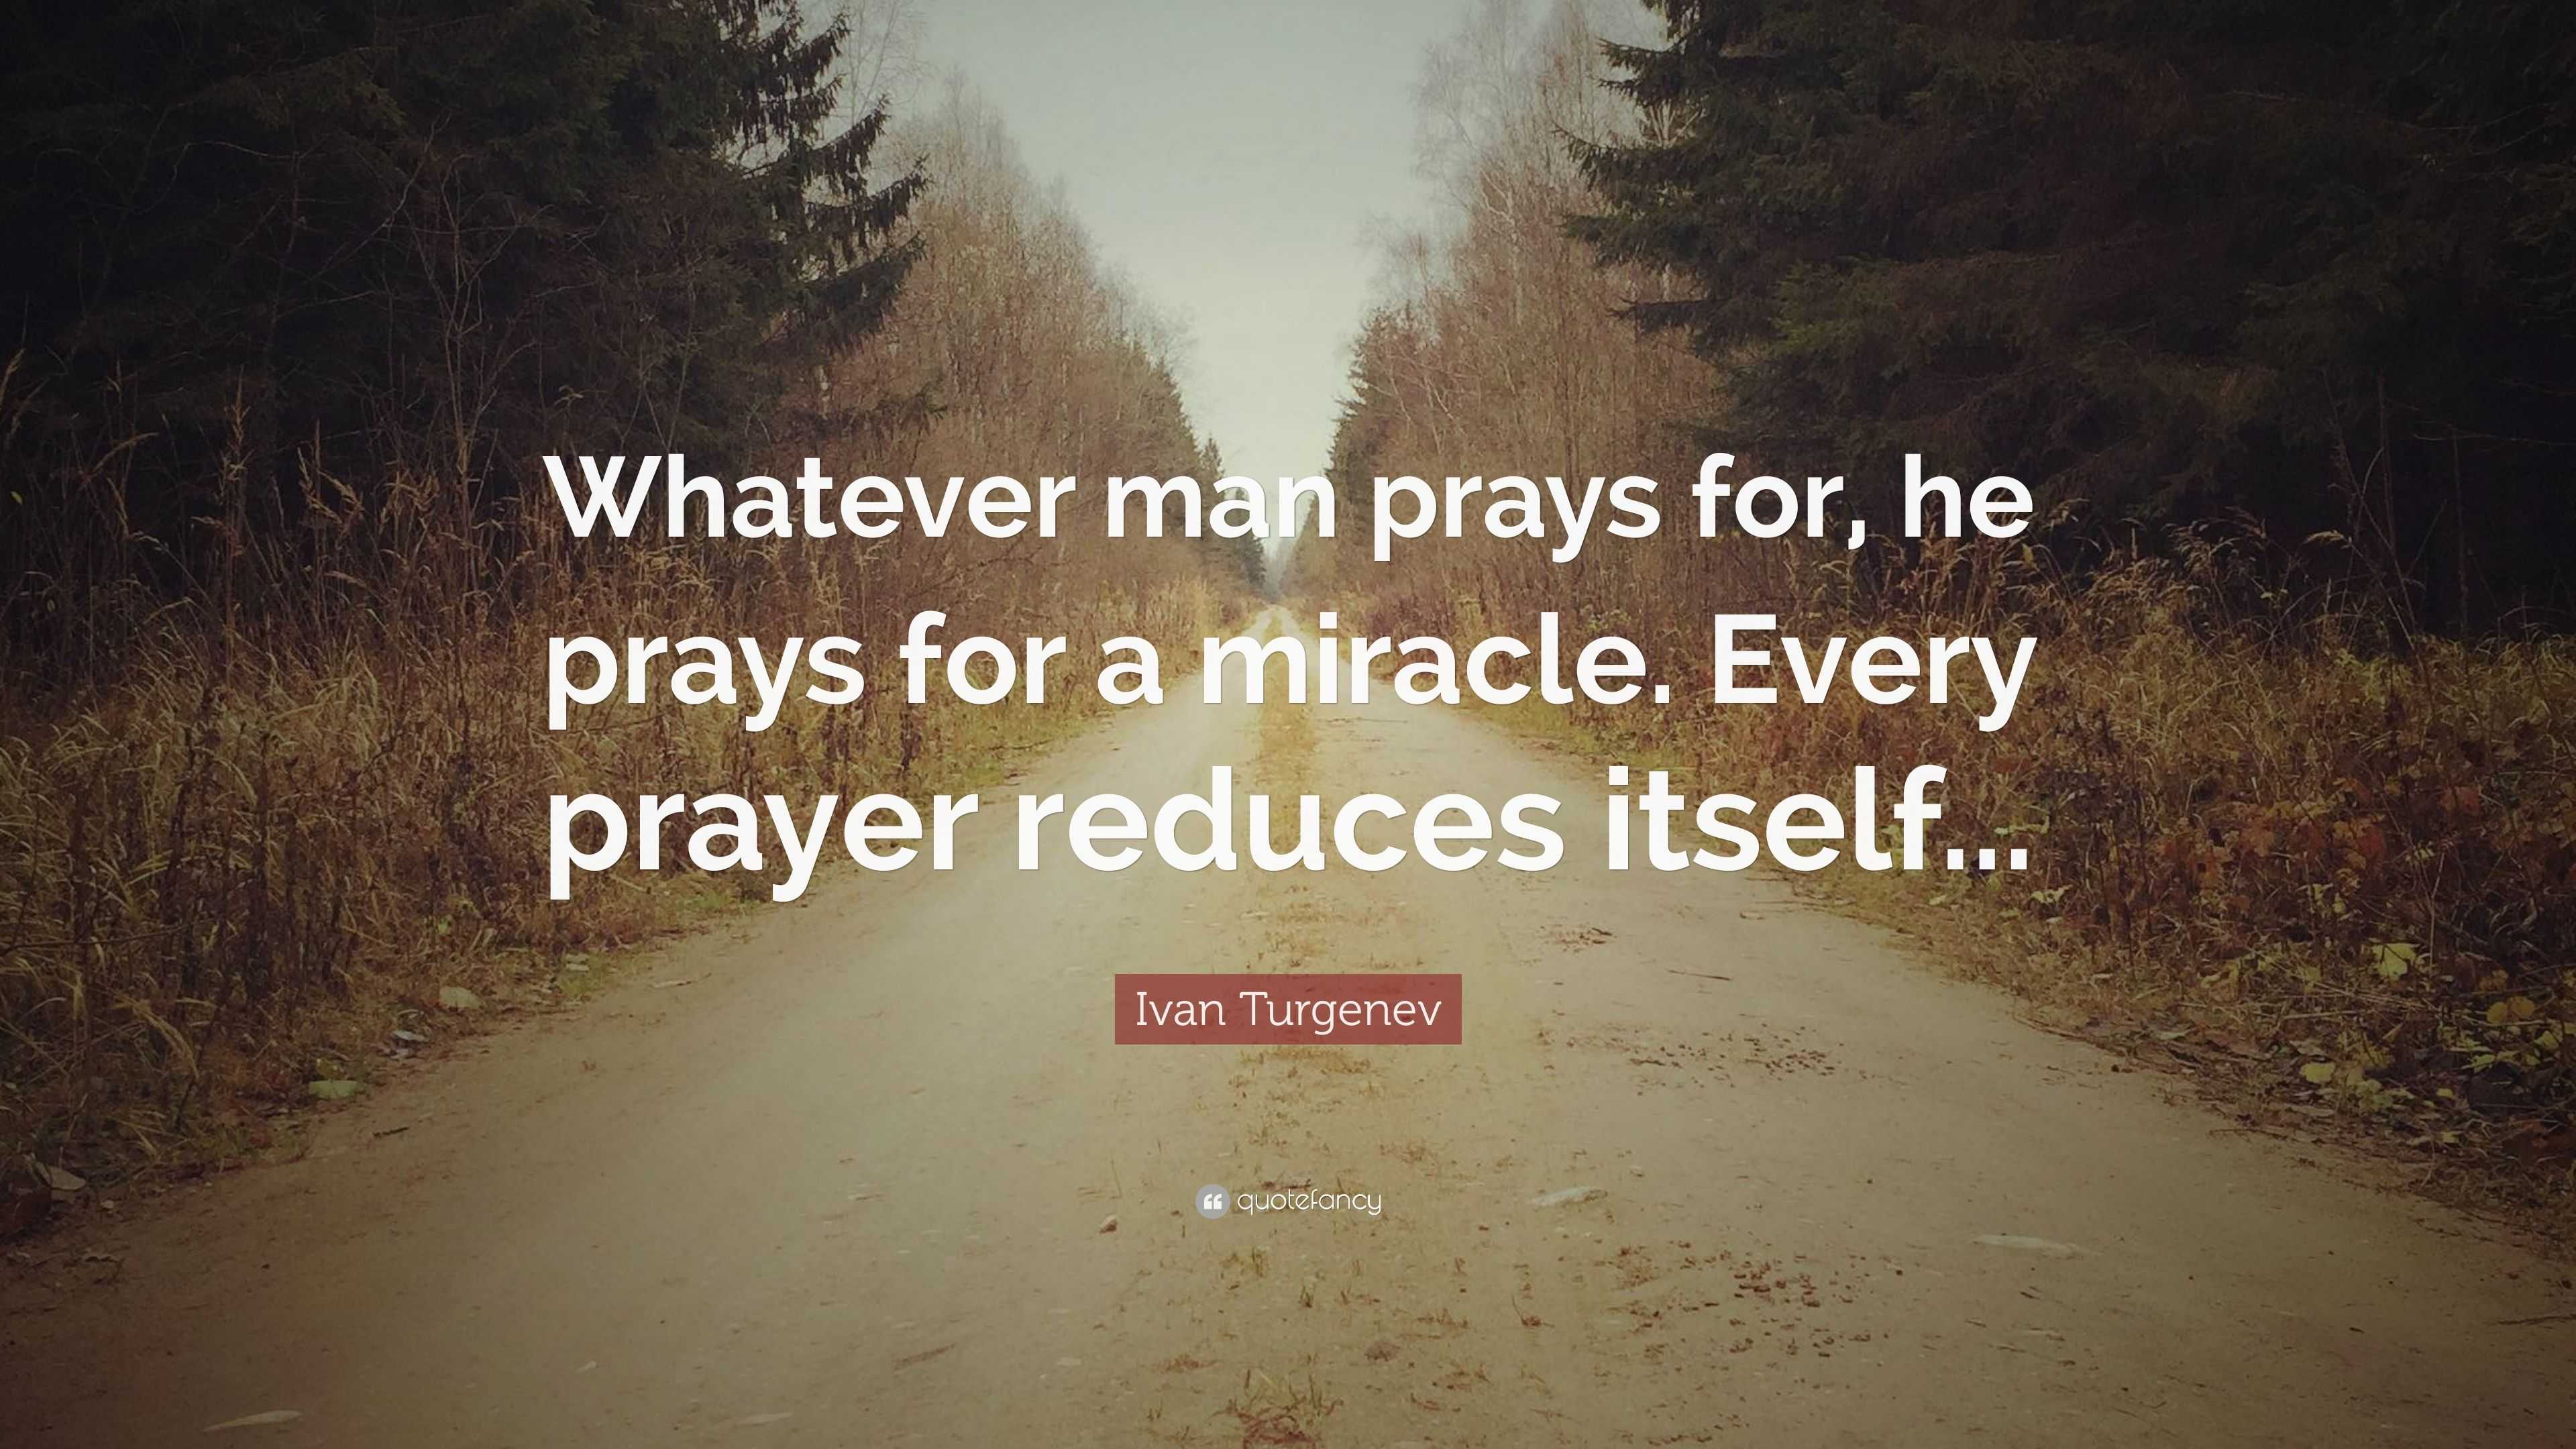 Ivan Turgenev Quote: “Whatever man prays for, he prays for a miracle ...